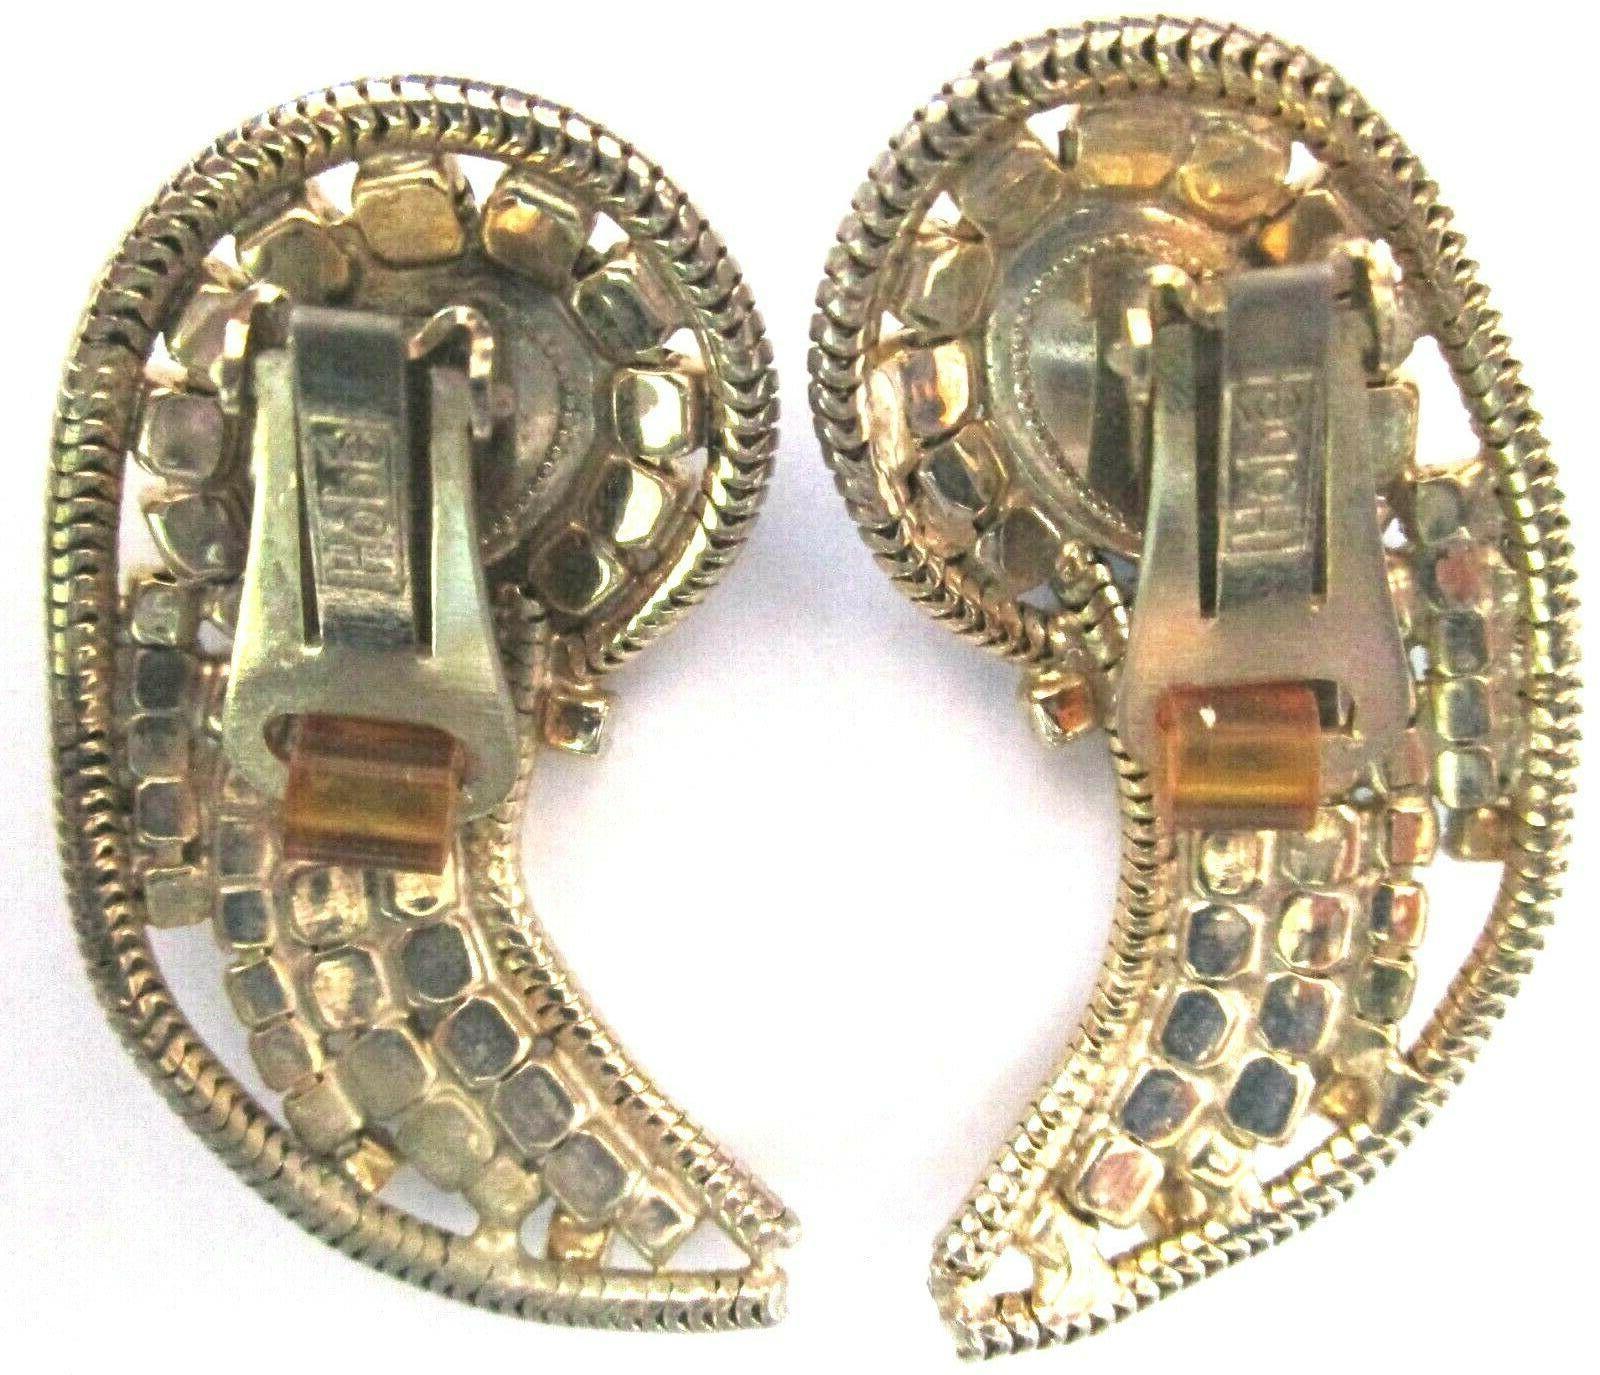 Vintage Designer Hobé Sparkling Ice CZ Rhinestone Ear Climber Clip Earrings with set with Sparkling multi color Ice Rhinestones and black glass cabochons. Gold tone mounting. Approx. 1.75